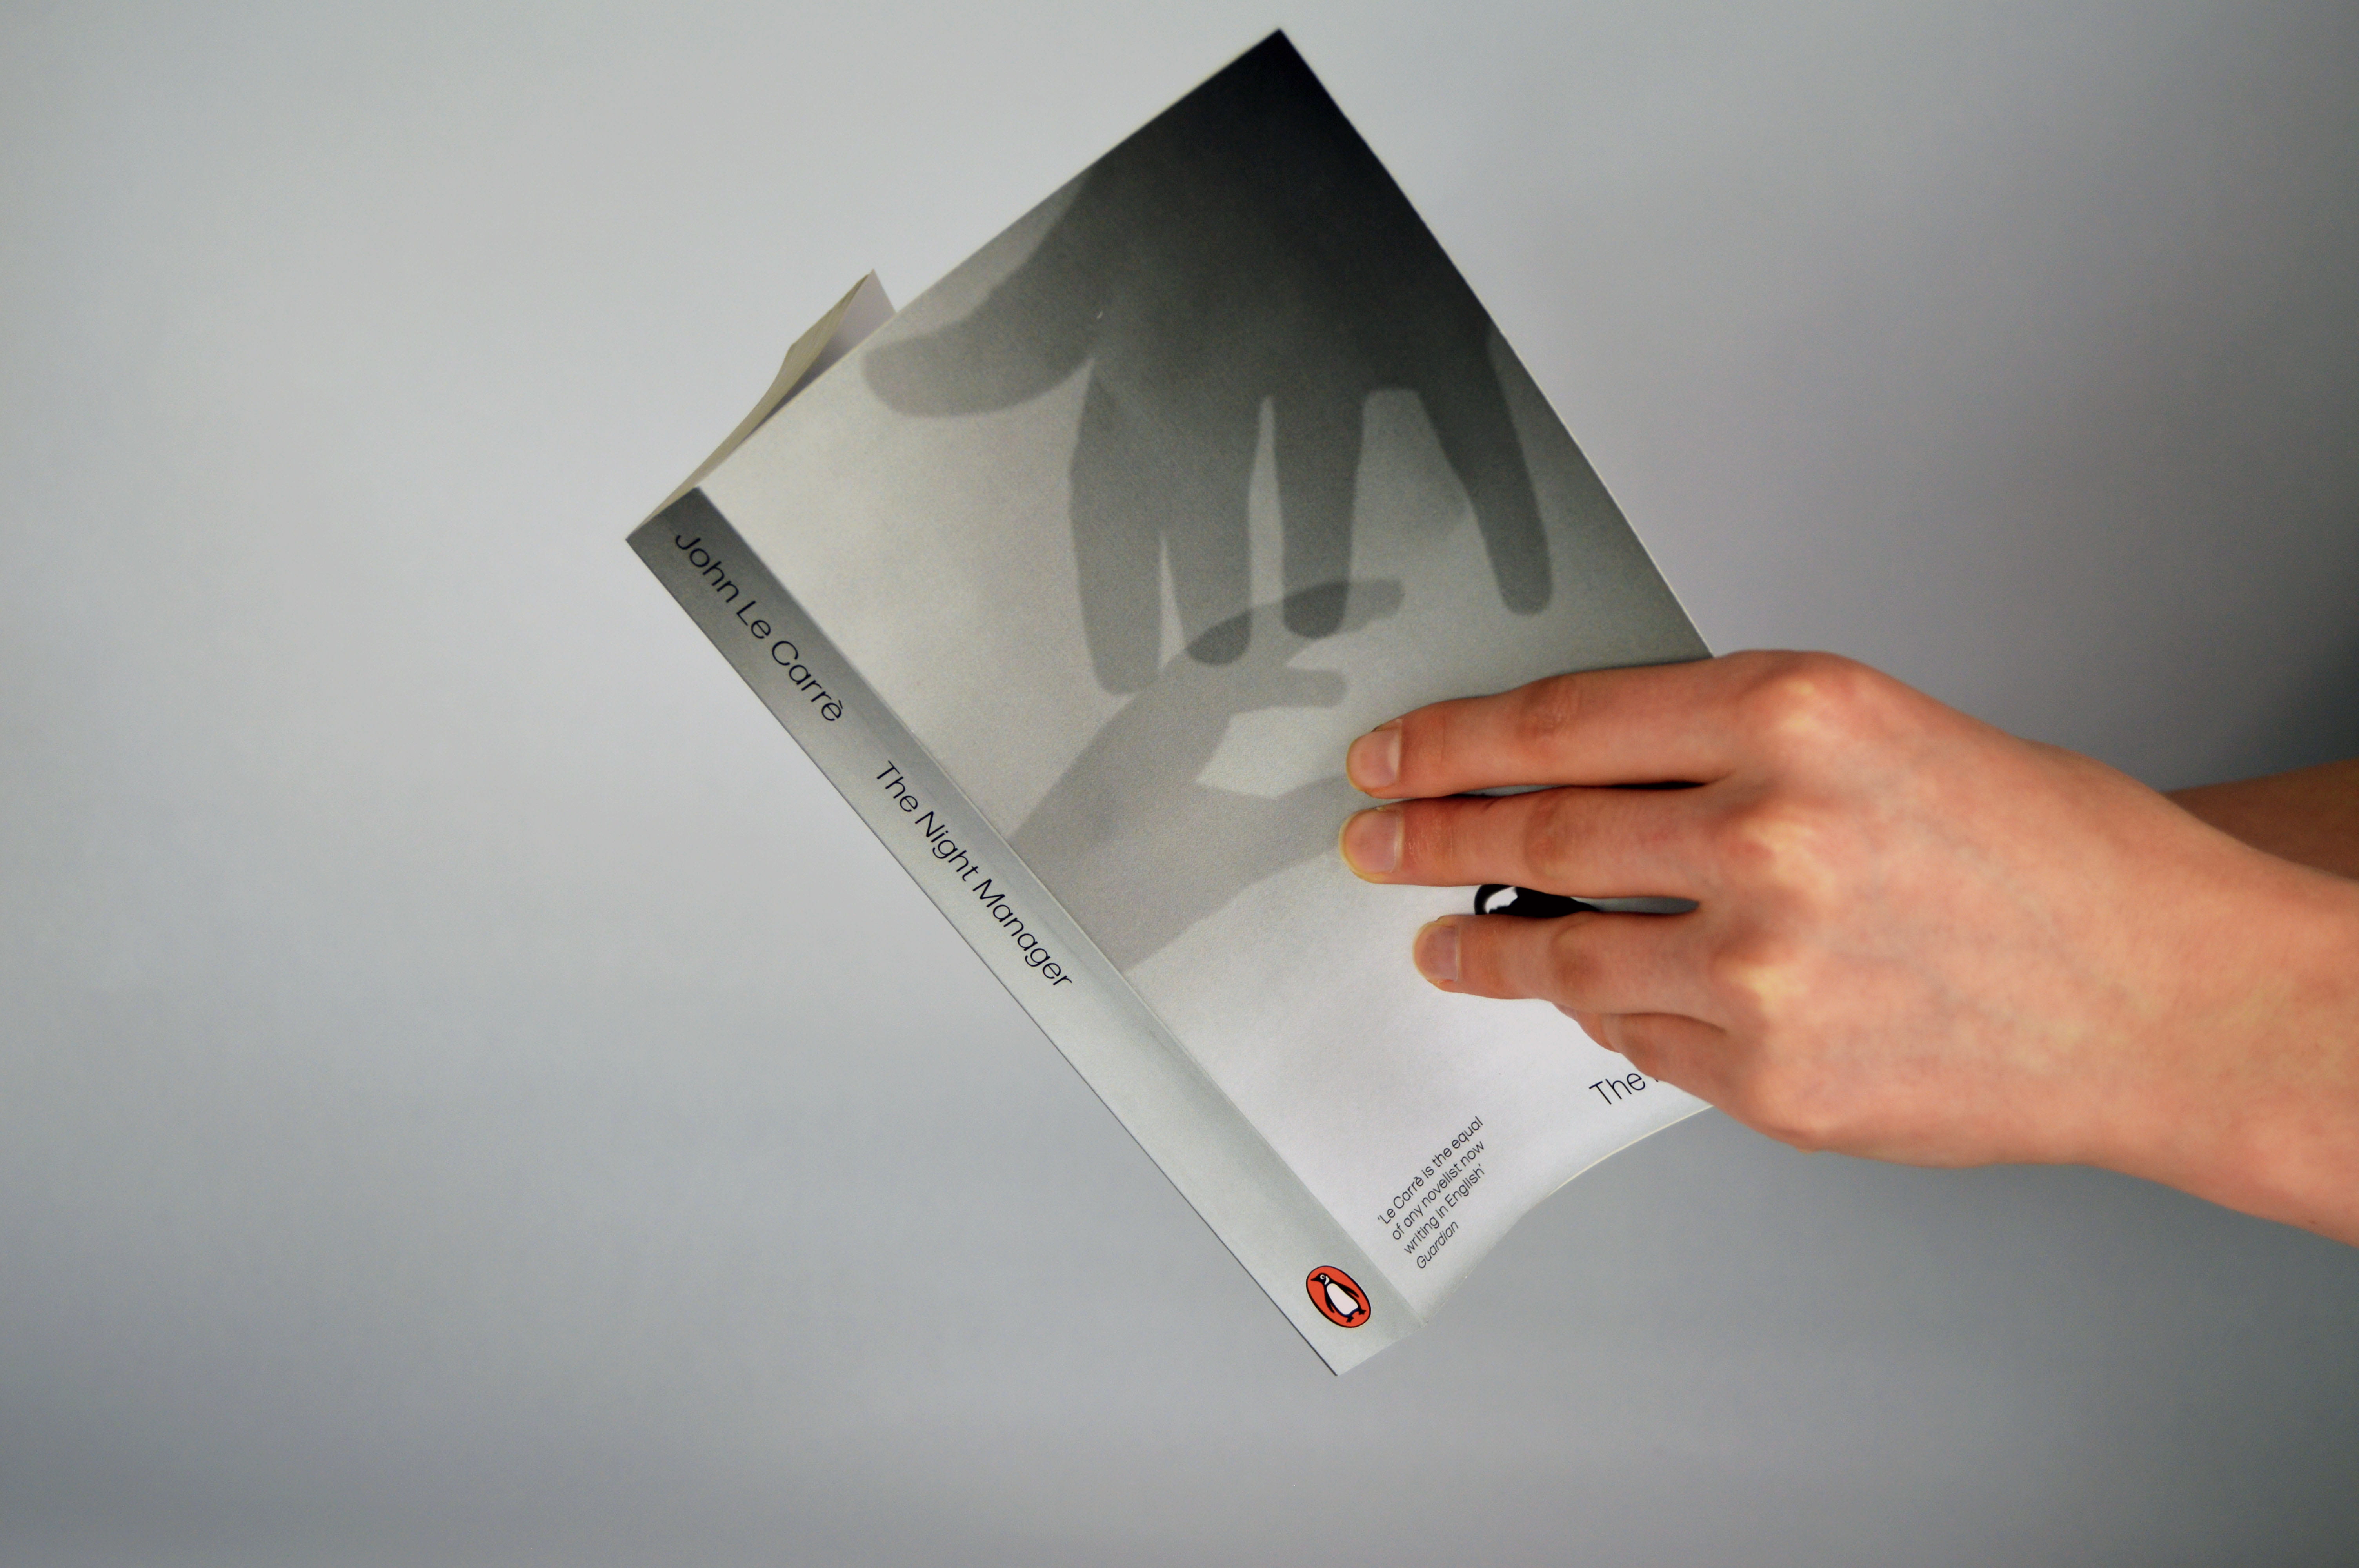 Book with front and spine visivle depicting the artwork of 2 hands reaching for the receptionists bell, and a spine matching the colour of the front cover background.